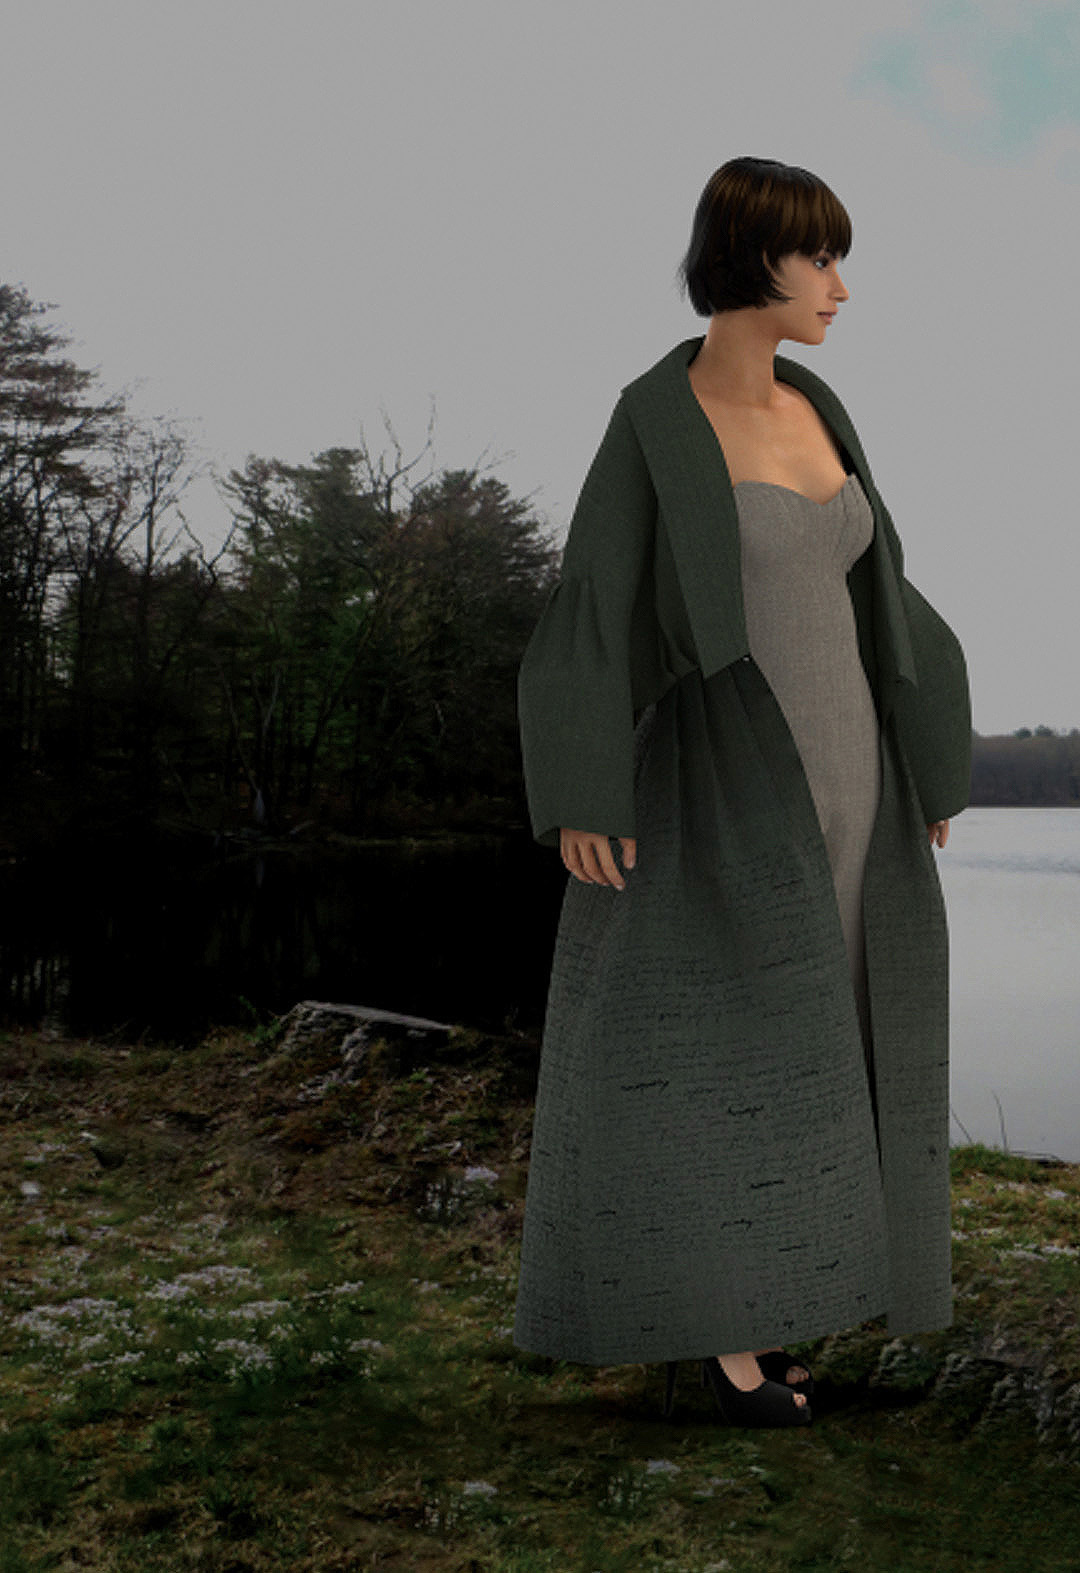 Digital image of a female avatar wearing a green coat and beige jumpsuit. The avatar is turned slightly to the right side, exposing the jumpsuit beneath the open coat. She is standing in front of a scenic background with a lake, clouded sky, and trees in the distance.